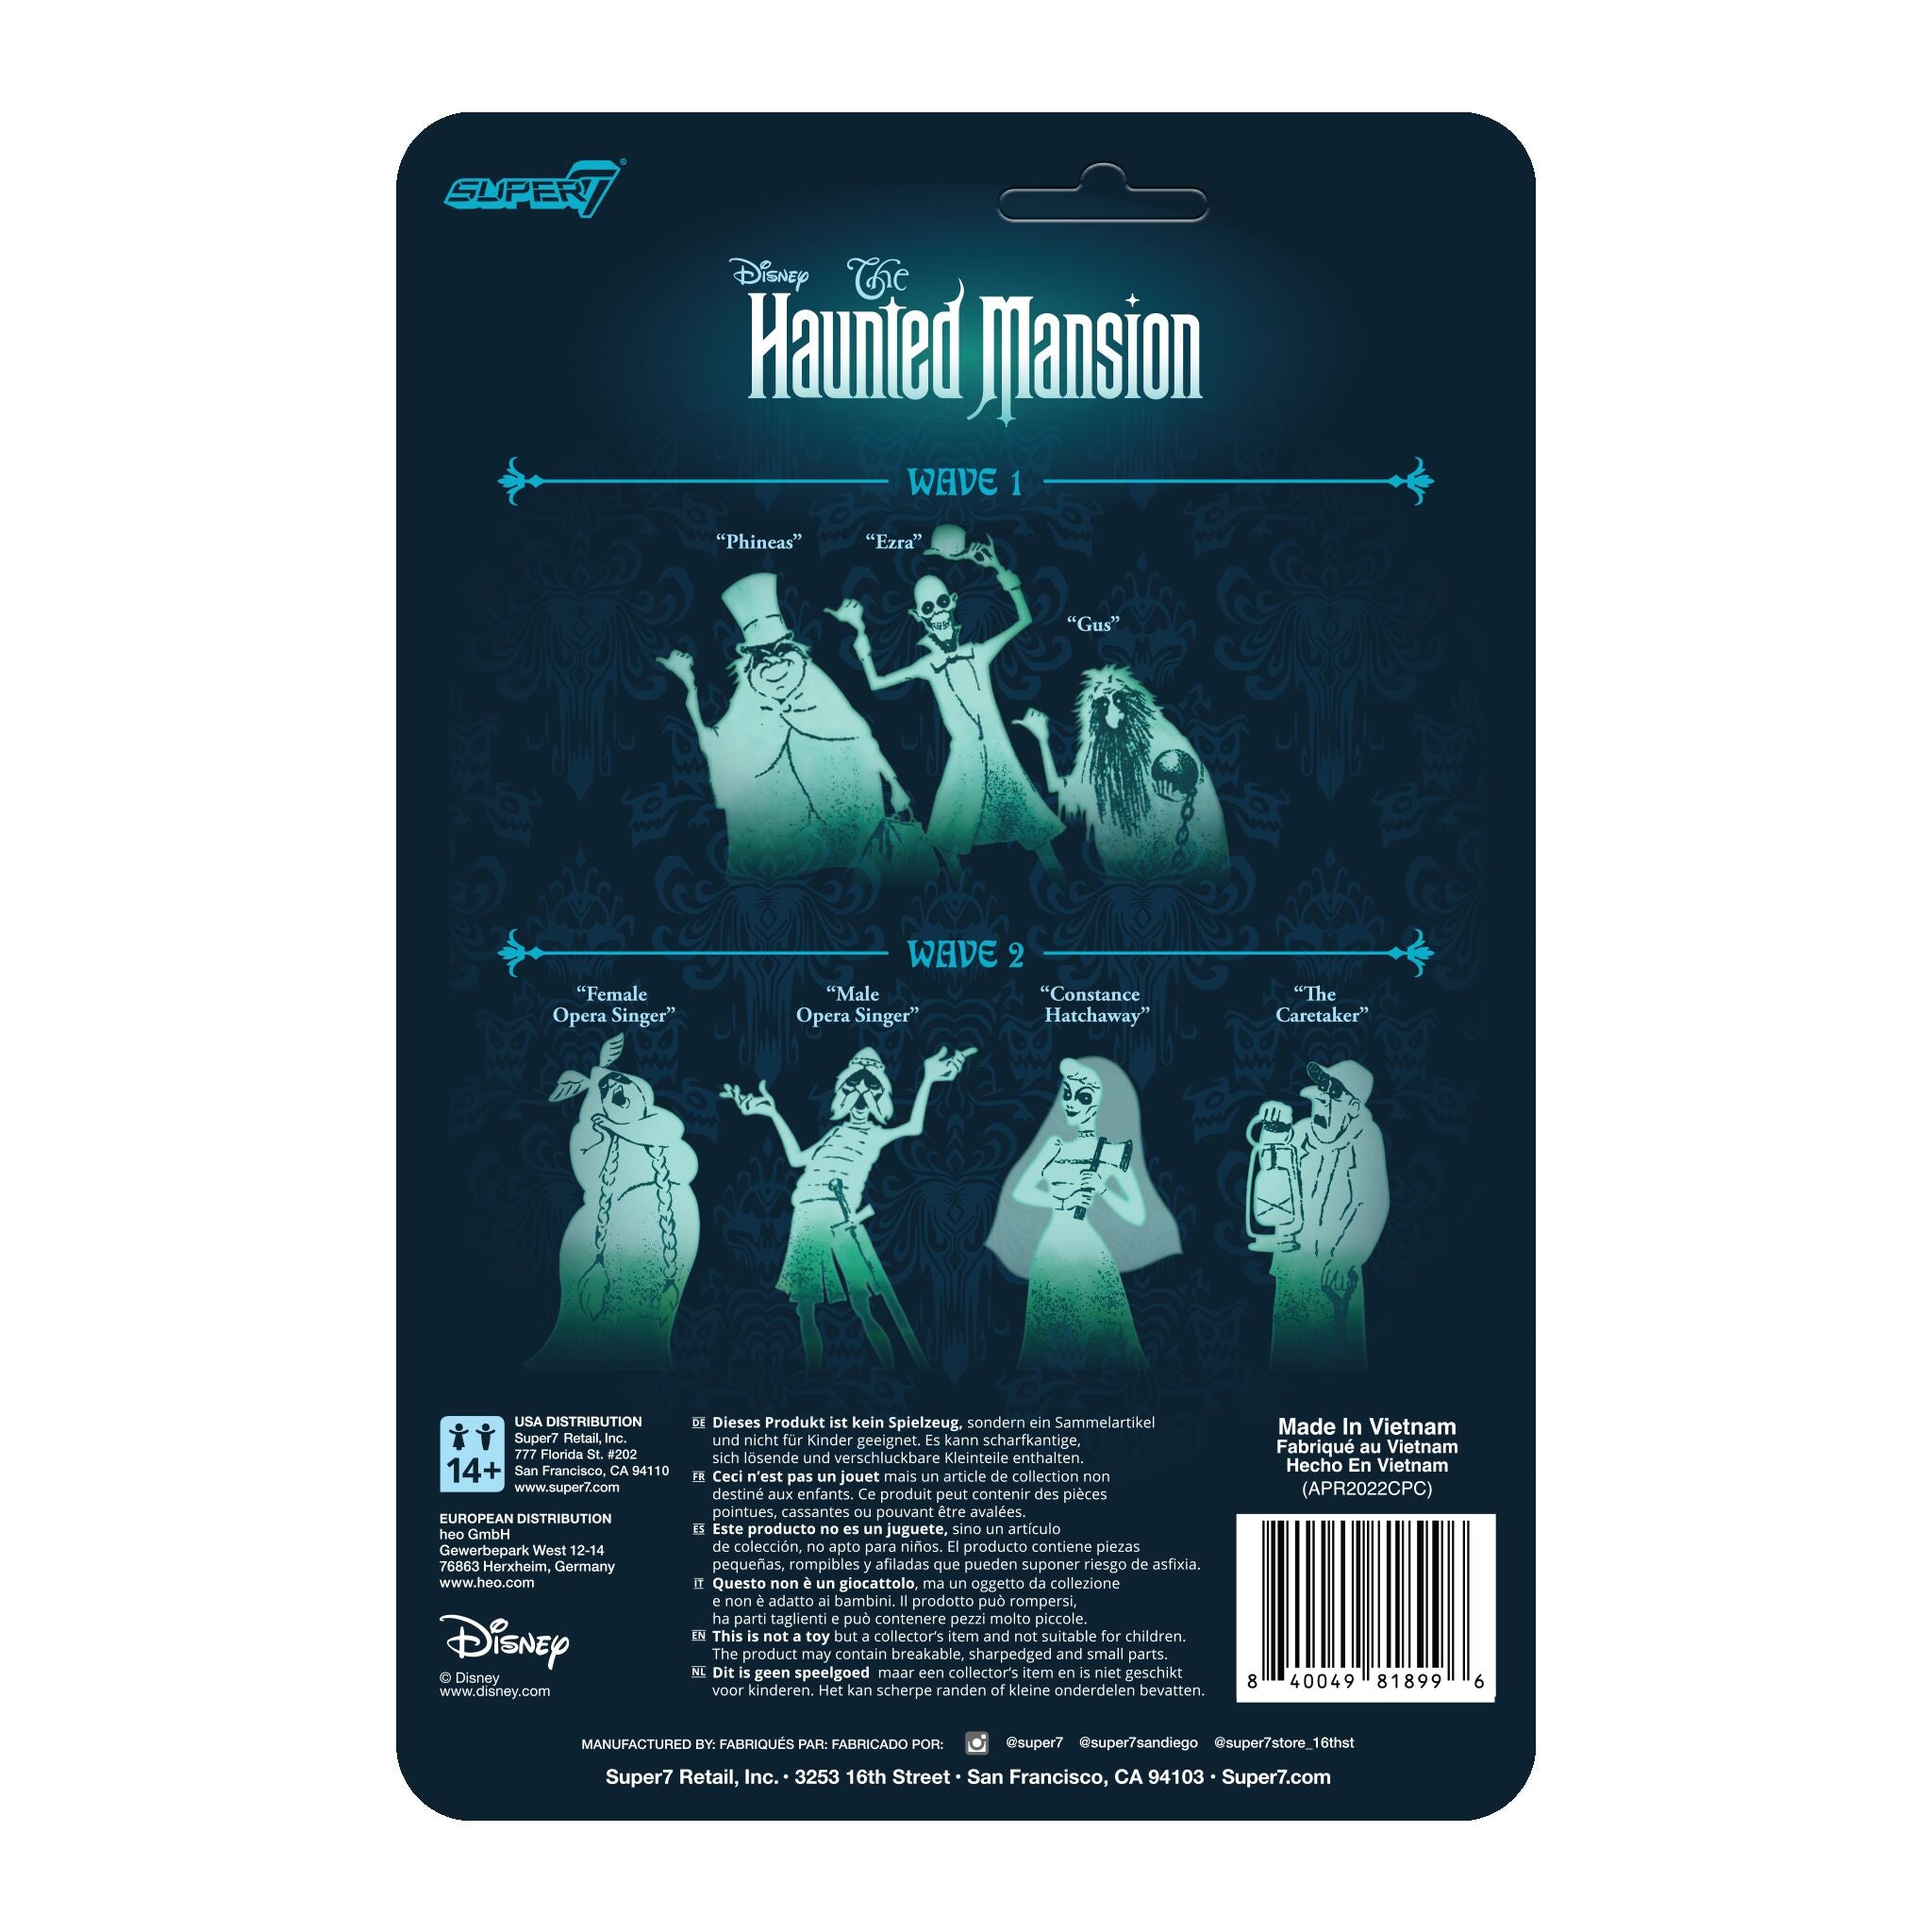 The Haunted Mansion ReAction Figures Wave 02 - Female Opera Singer